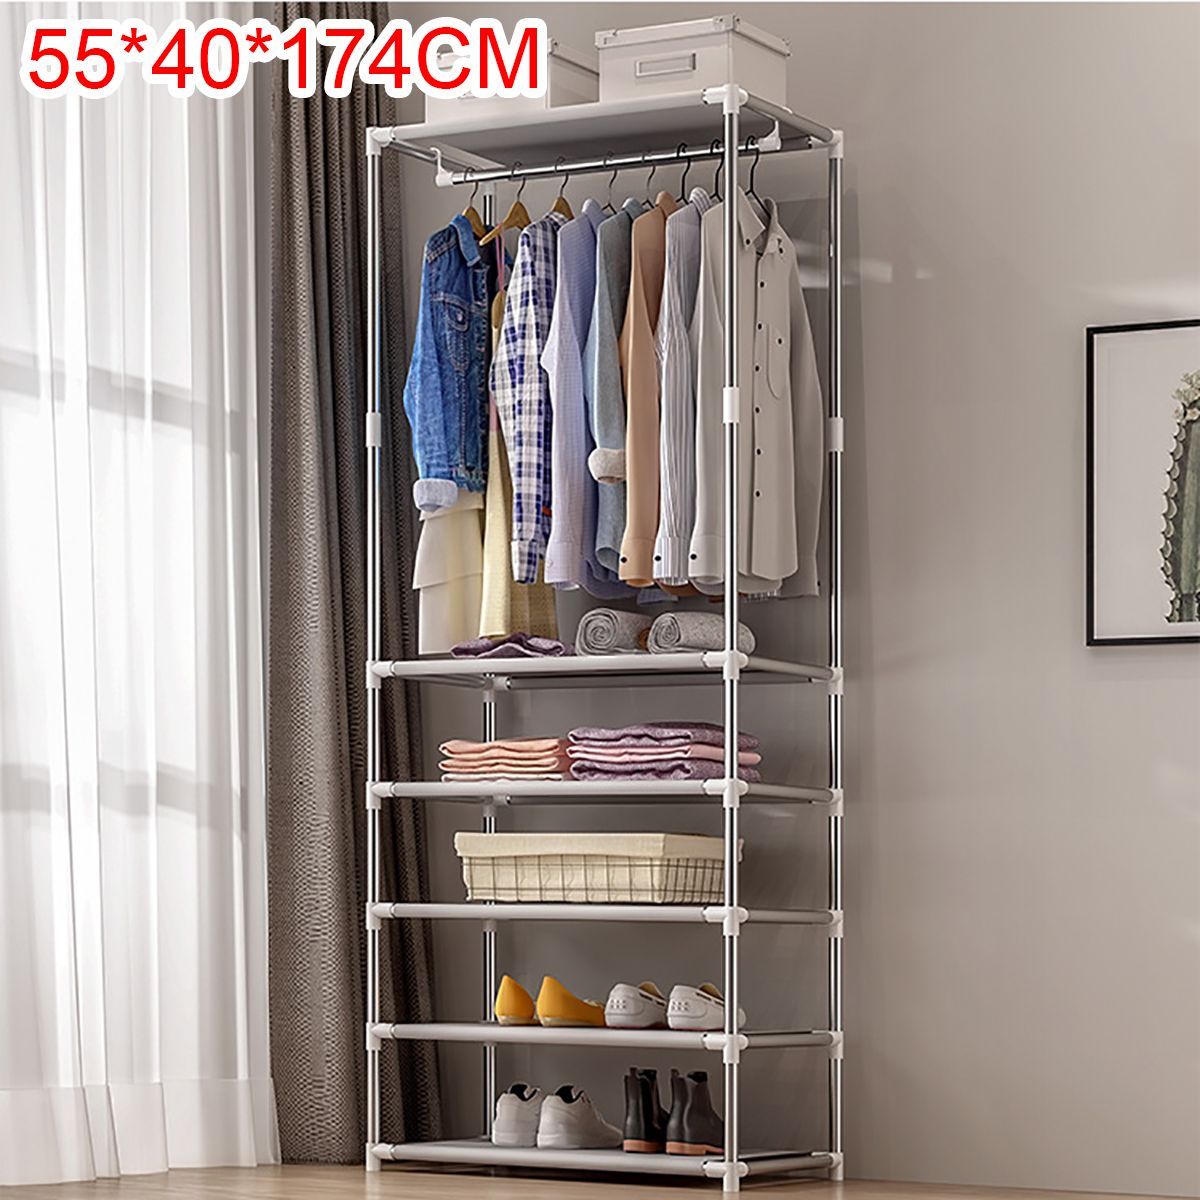 Simple-Coat-Rack-Floor-Clothes-Hangers-Creative-Clothing-Rack-Shelf-Easy-Assembly-Bedroom-Hanging-Cl-1587029